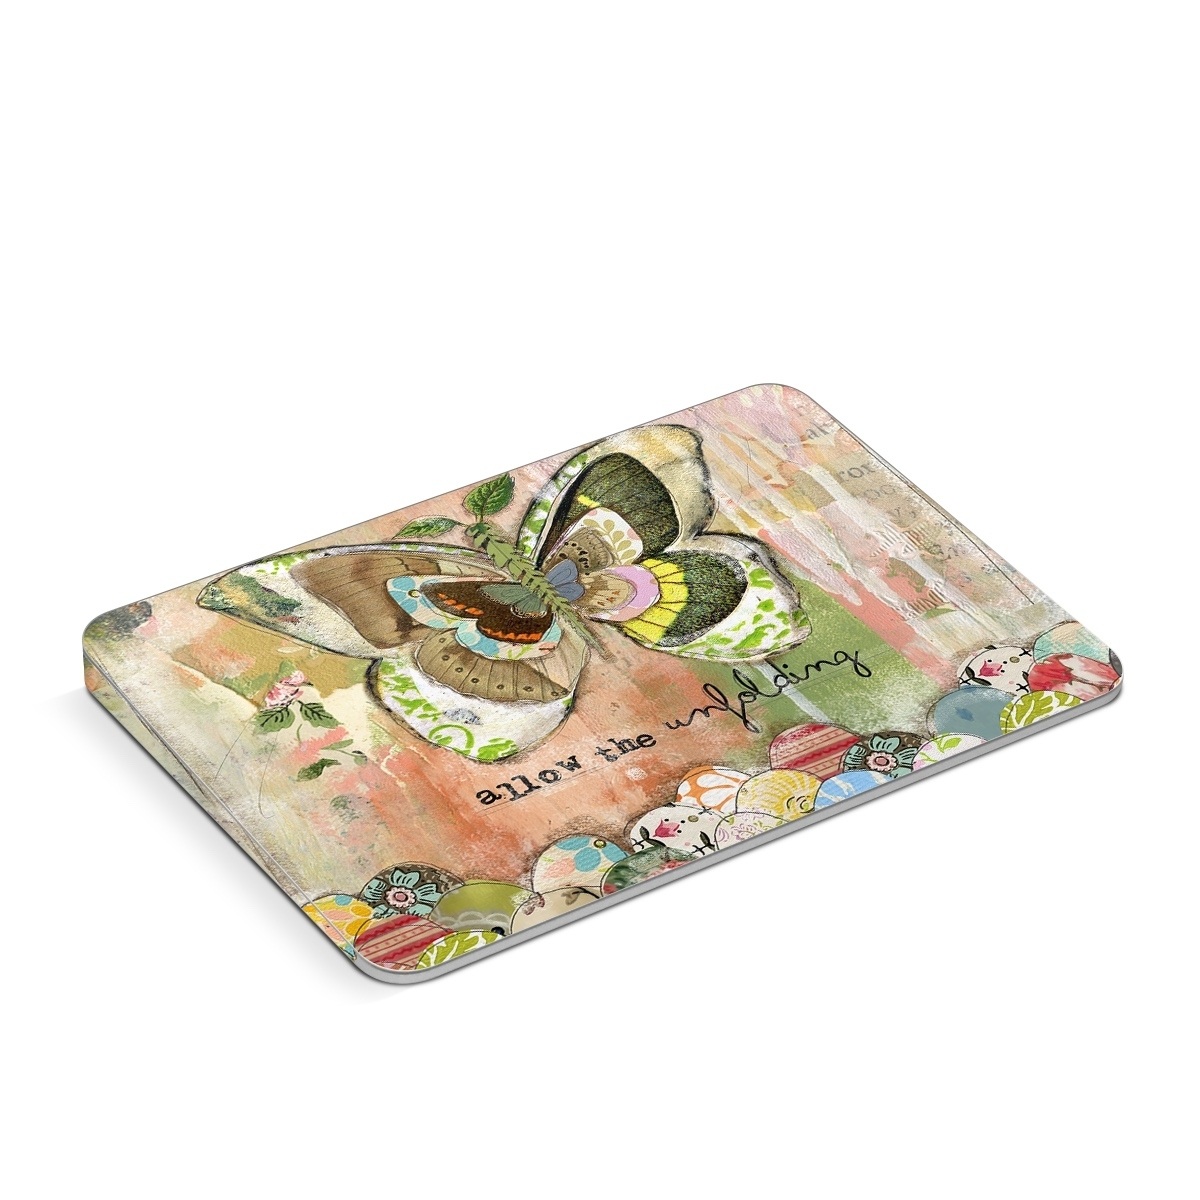 Apple Magic Trackpad Skin design of Butterfly, Art, Fictional character, Pollinator, Moths and butterflies, Watercolor paint, Illustration, with green, brown, yellow, blue, pink, red colors